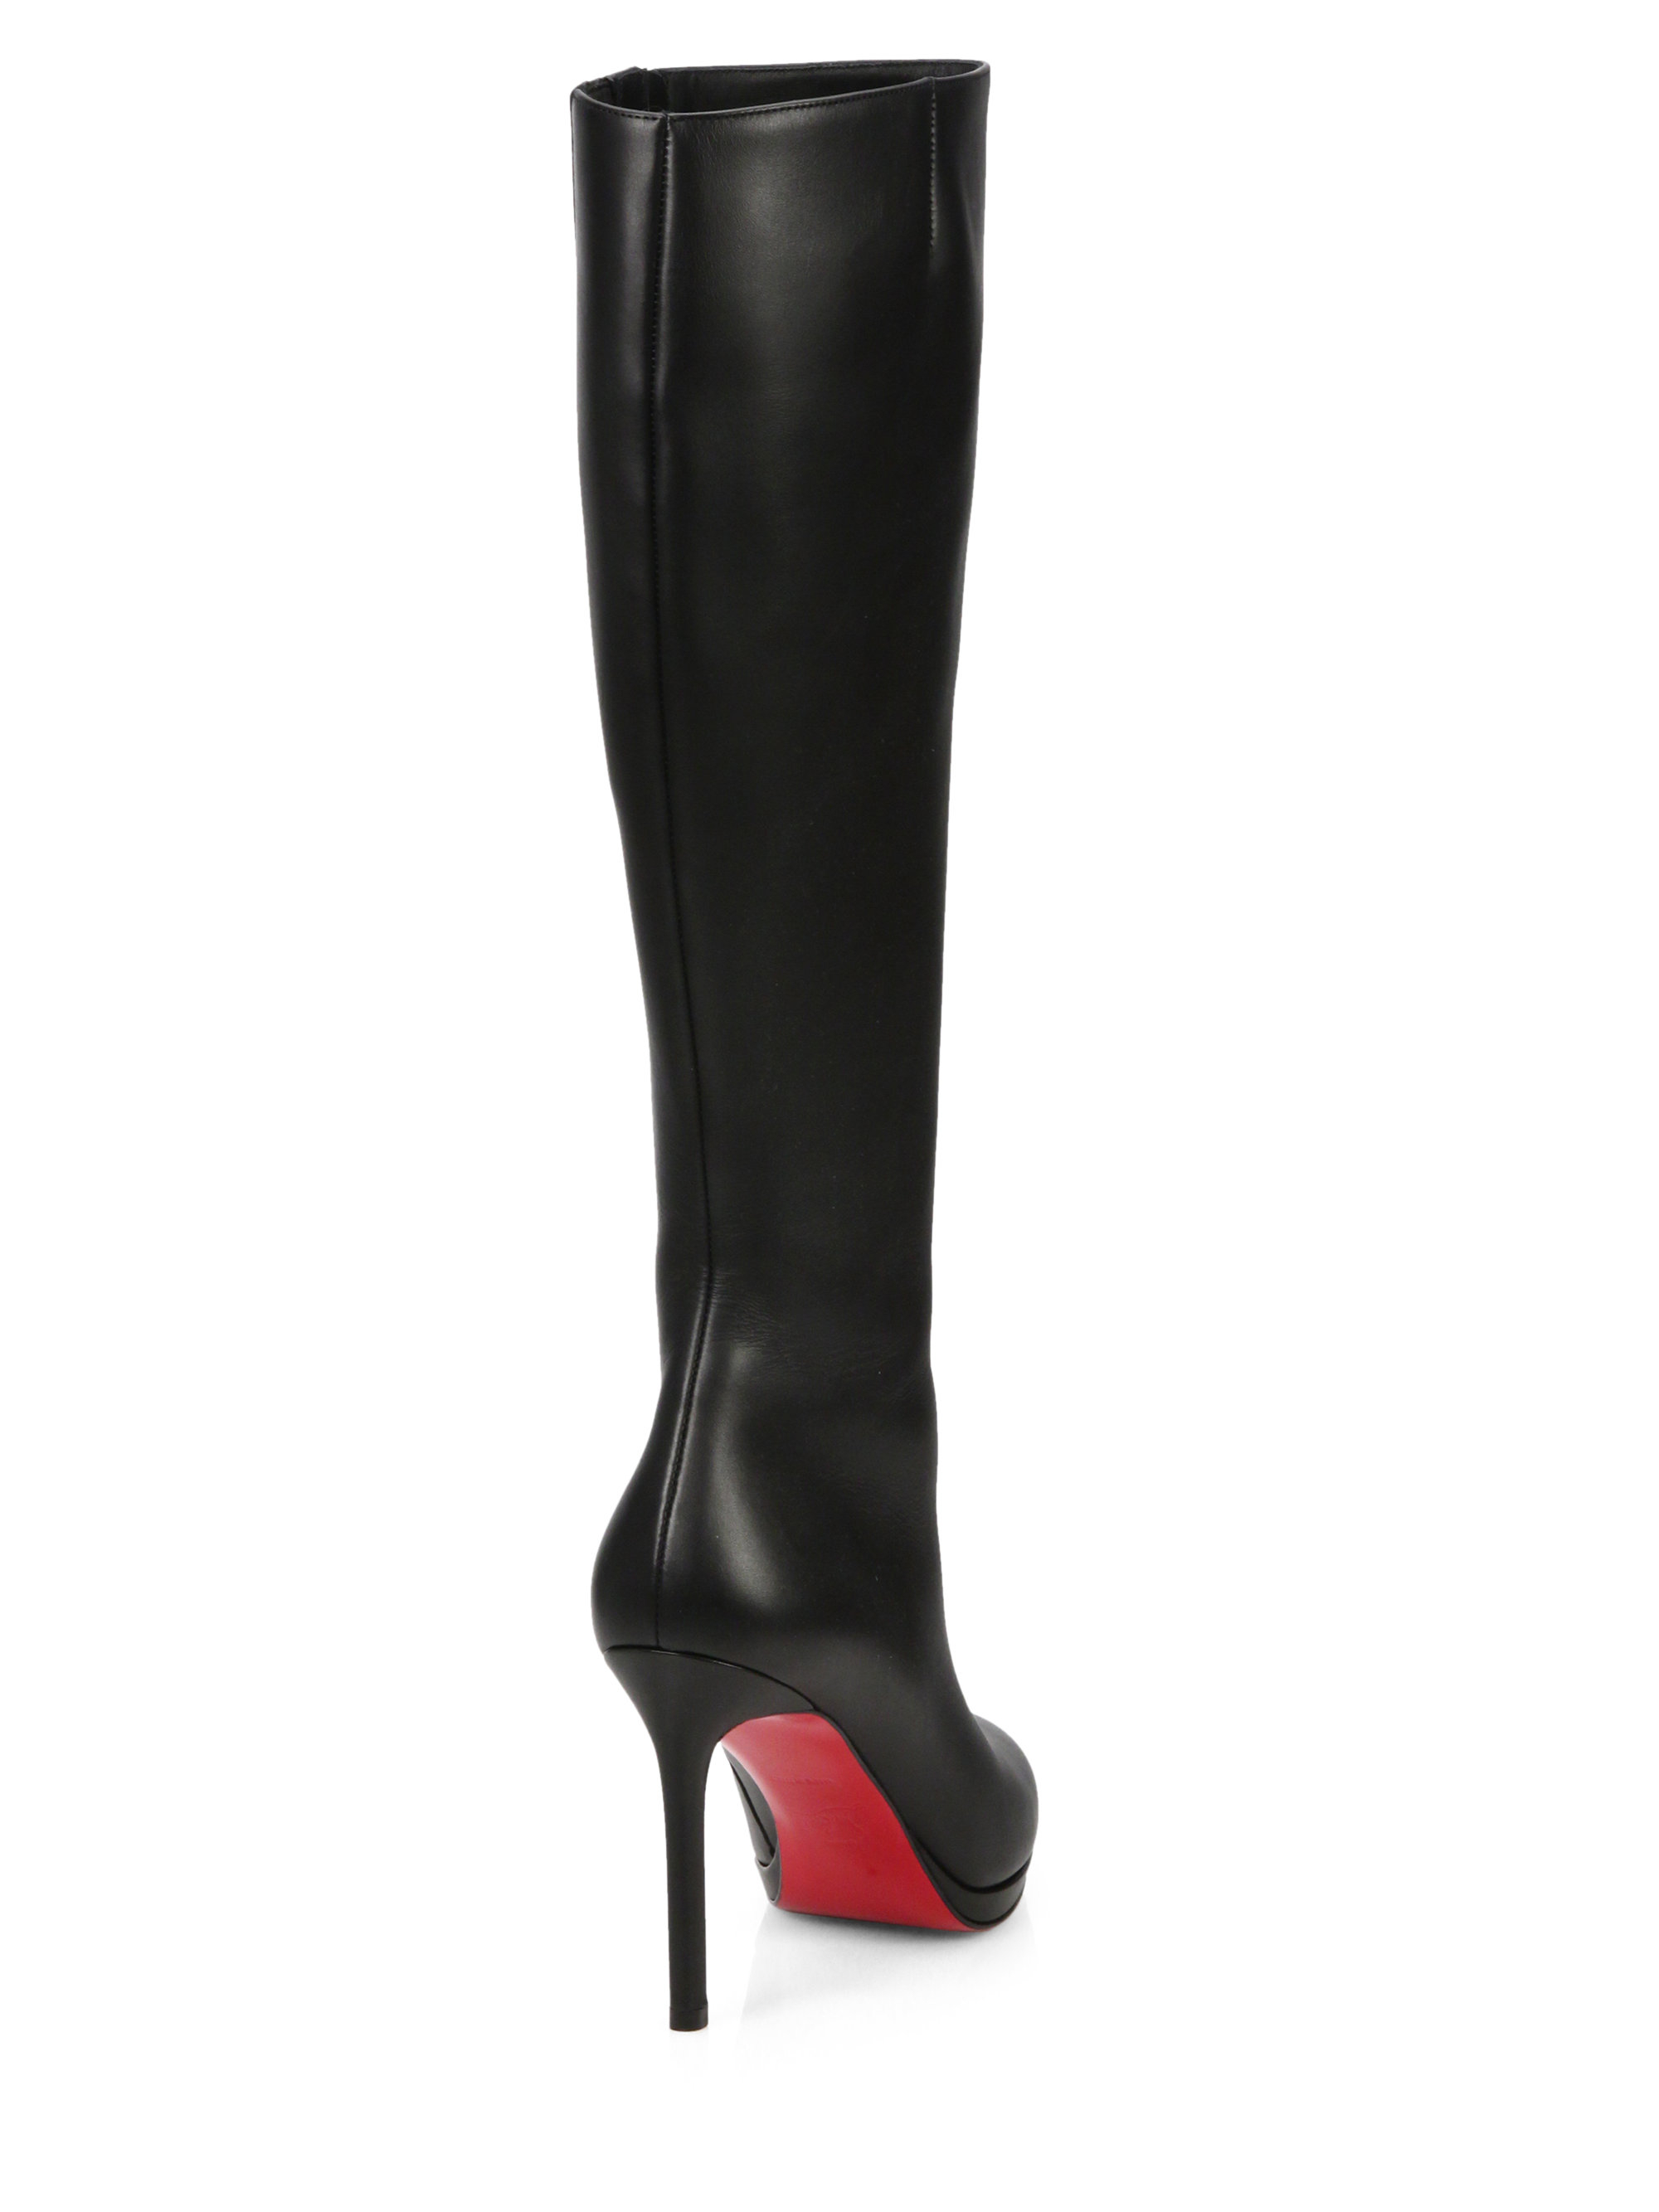 Lyst - Christian louboutin Botalili Knee-high Boots in Black